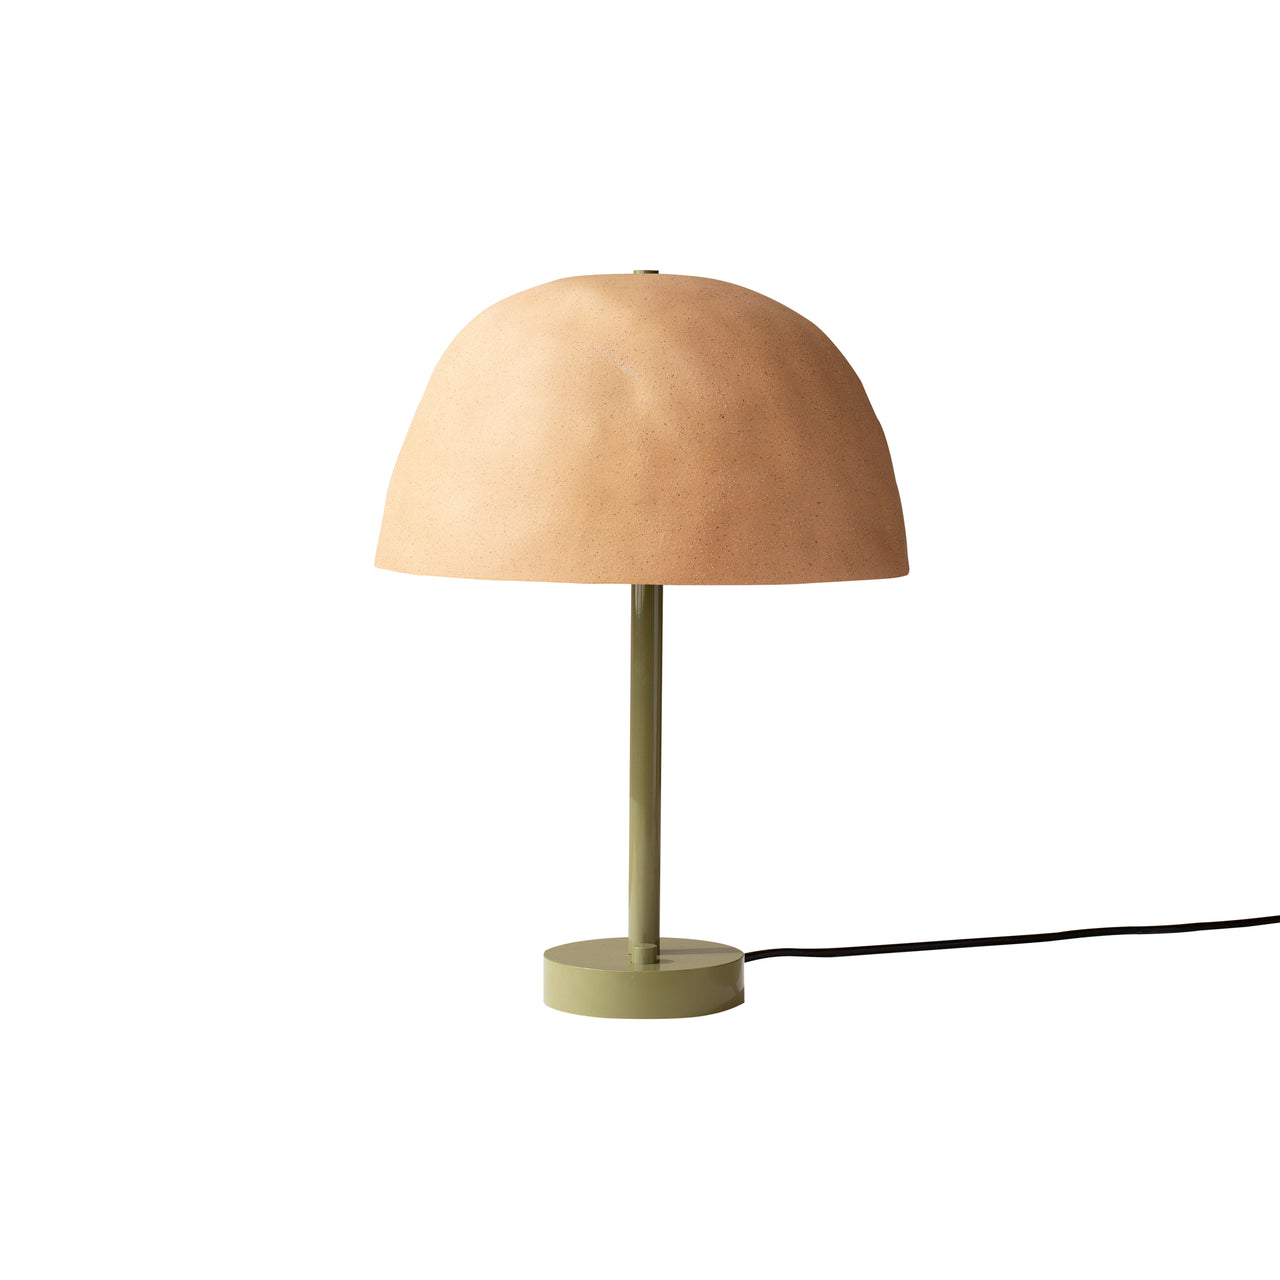 Dome Table Lamp: Tan Clay + Reed Green